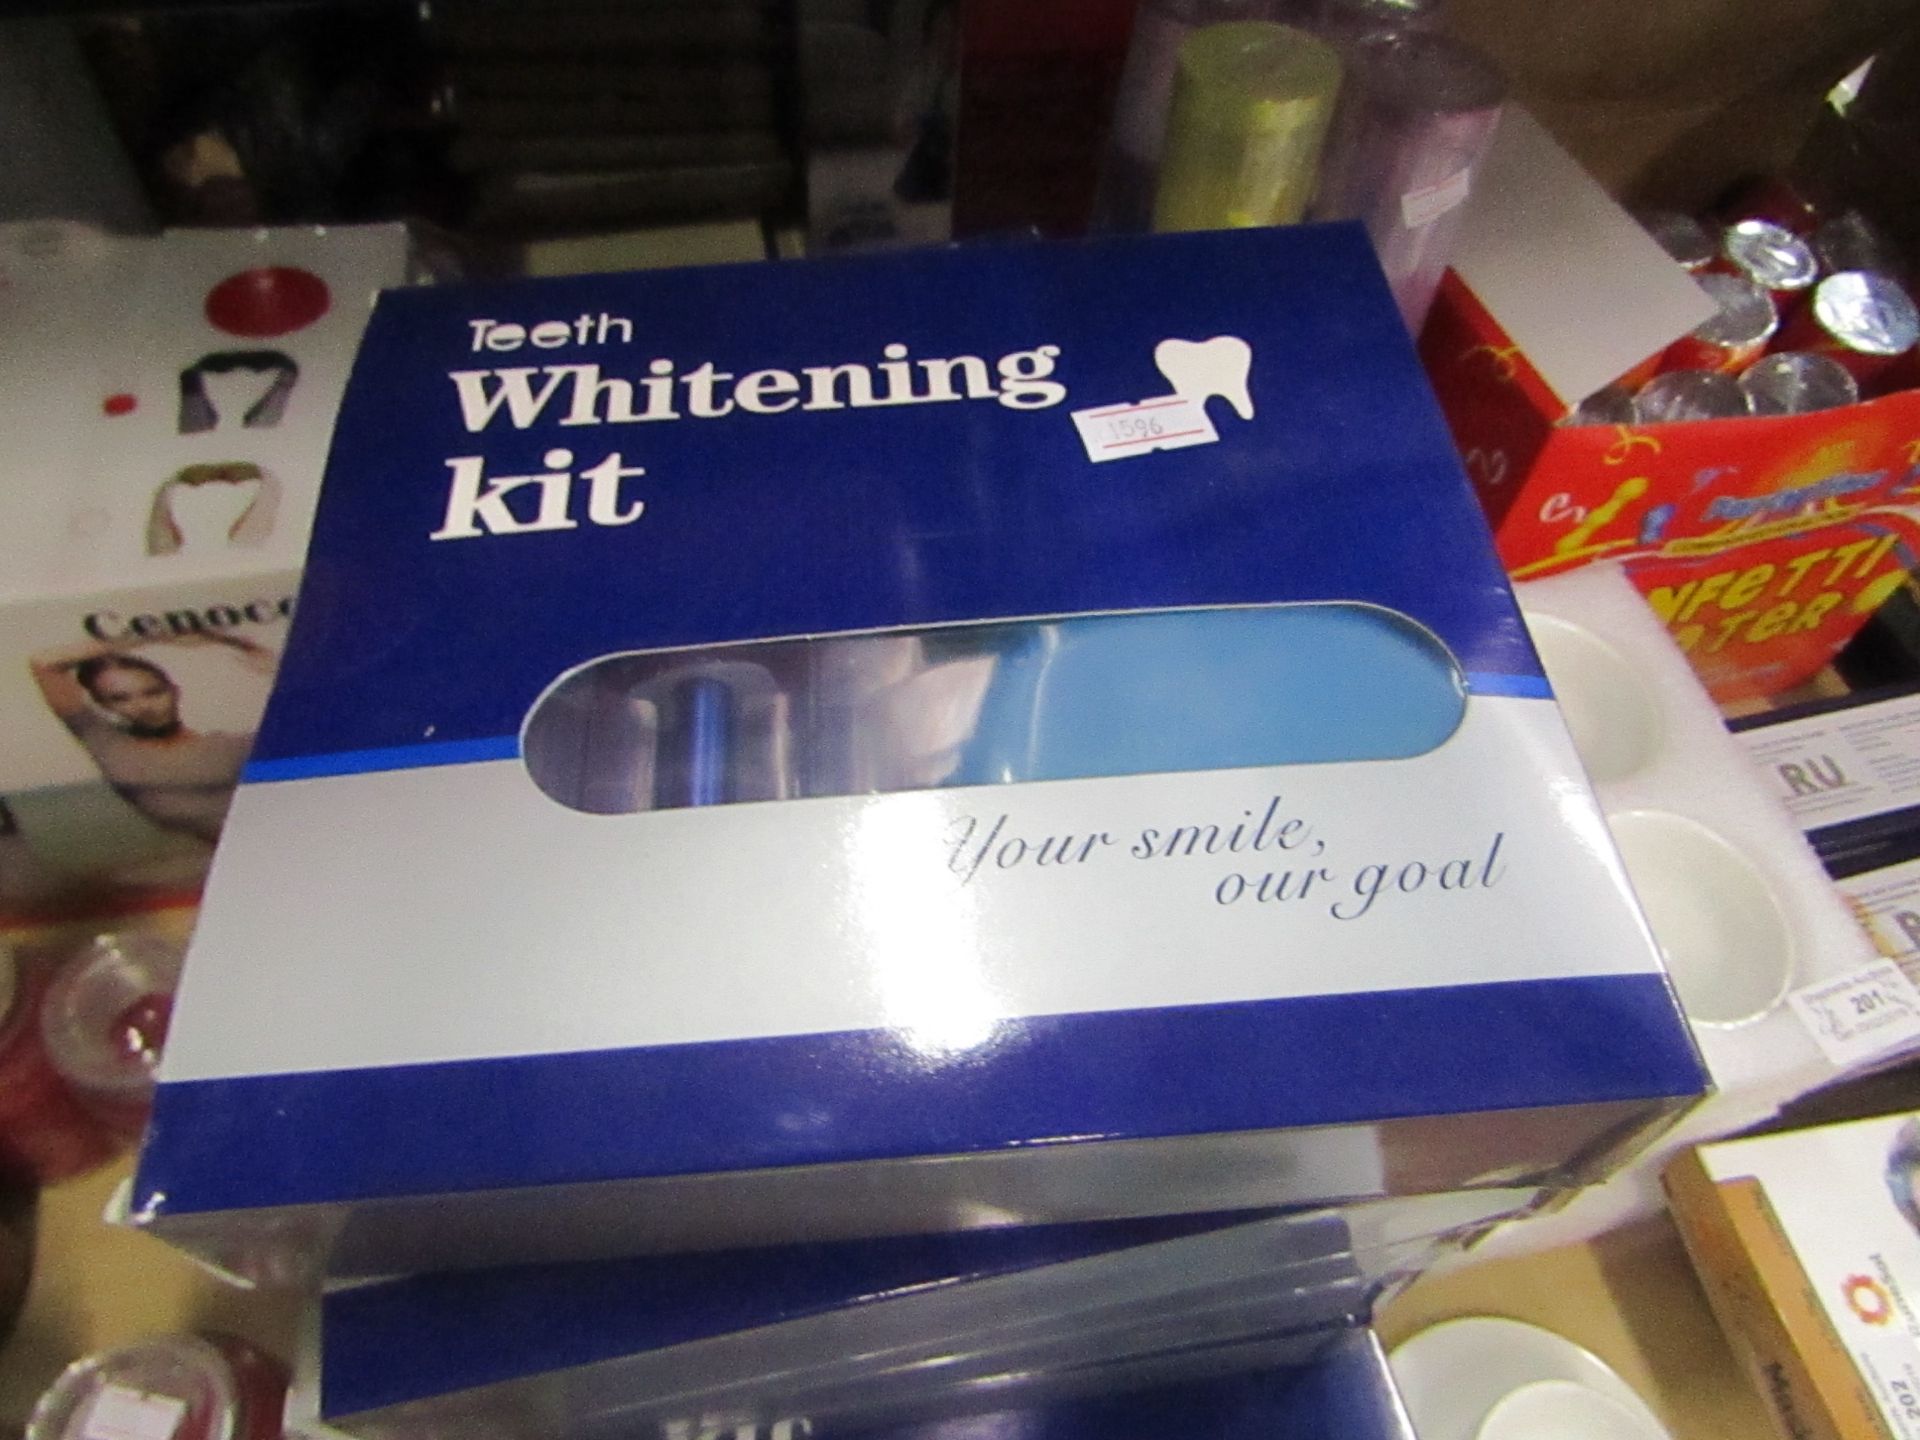 5 x teeth whitening kit , new and boxed. - Image 2 of 2